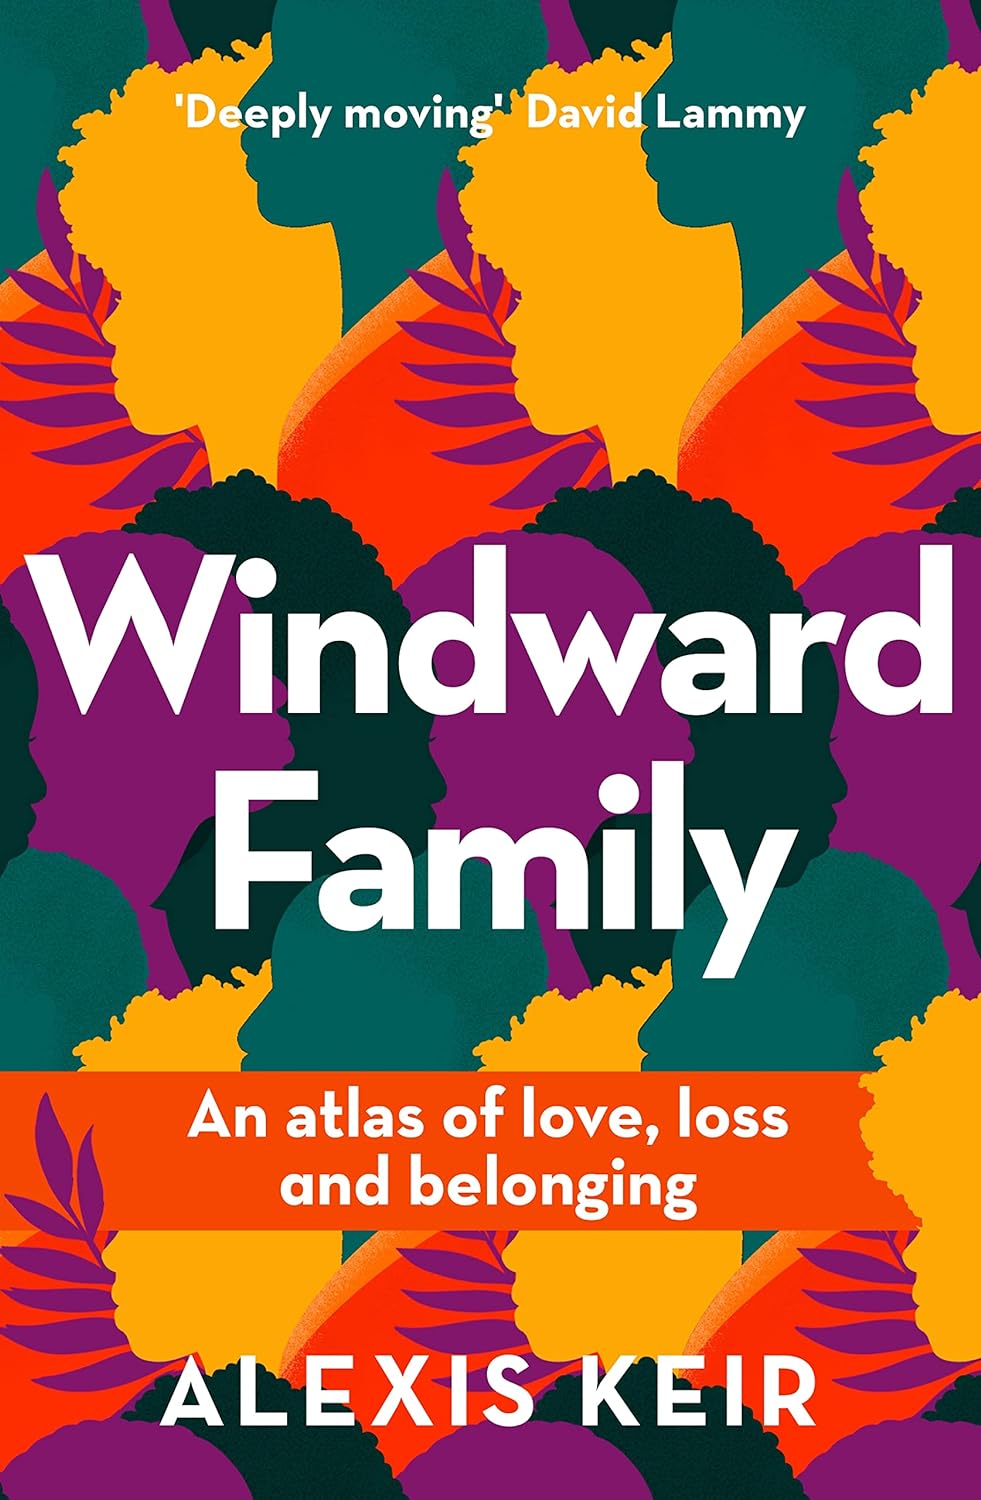 Windward Family: An atlas of love, loss and belonging by Alexis Keir Paperback